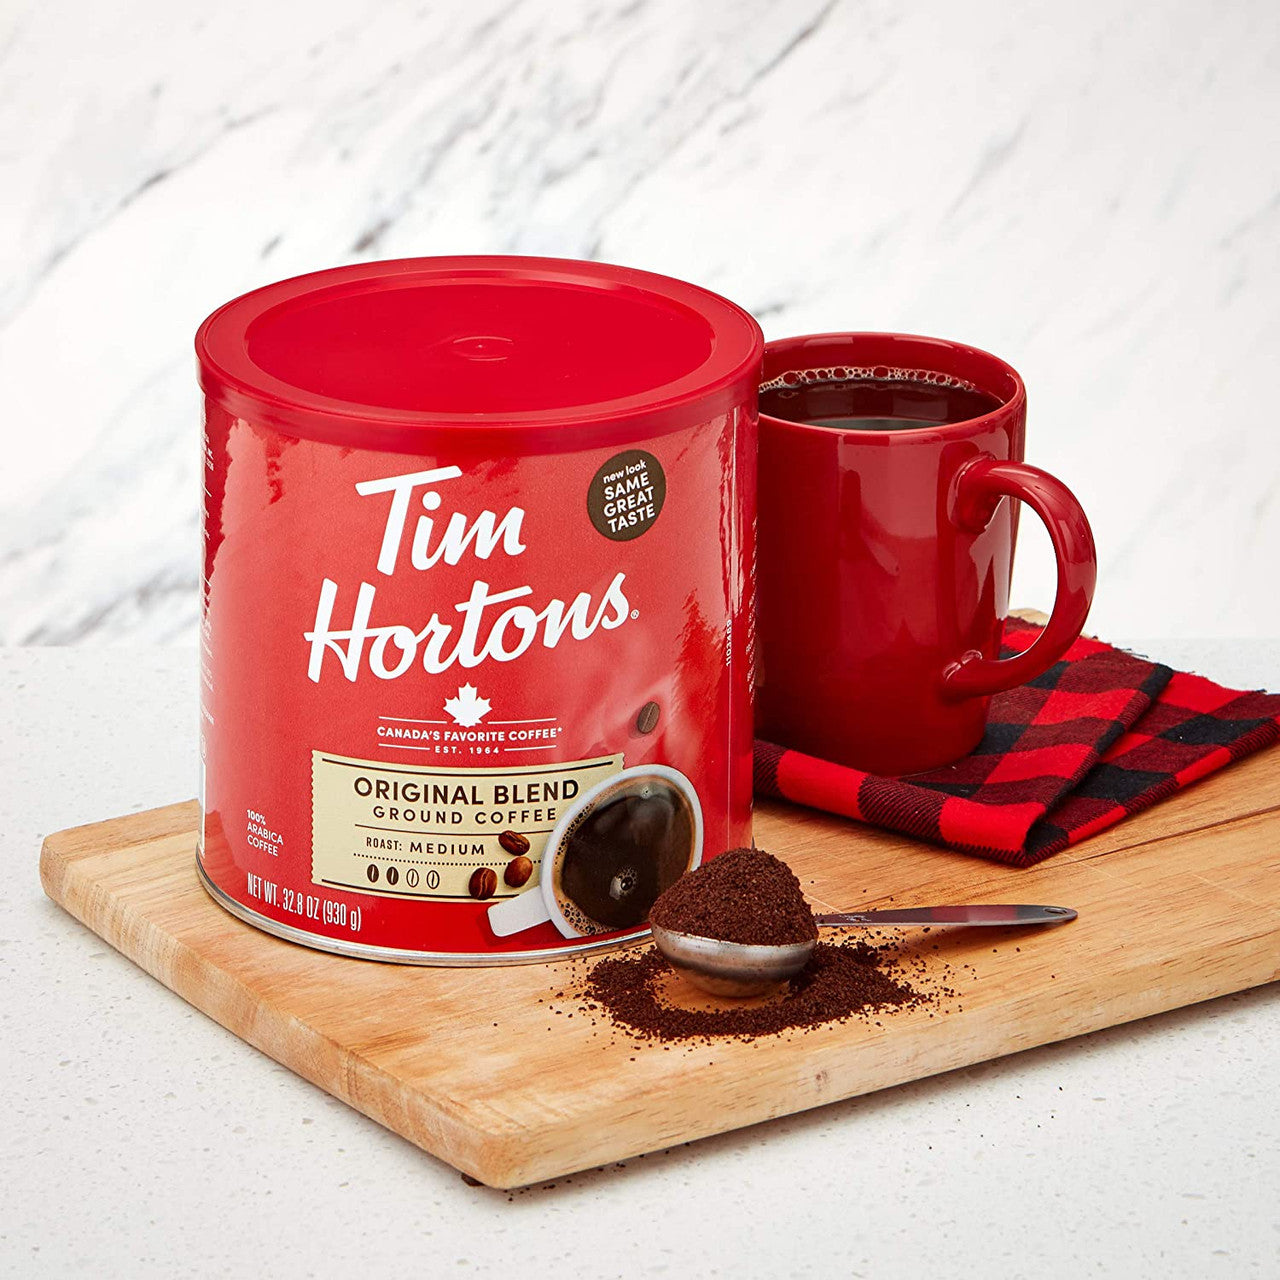 Tim Hortons Coffee, Fine Grind Original Blend 930g/33oz.,{Imported from Canada}